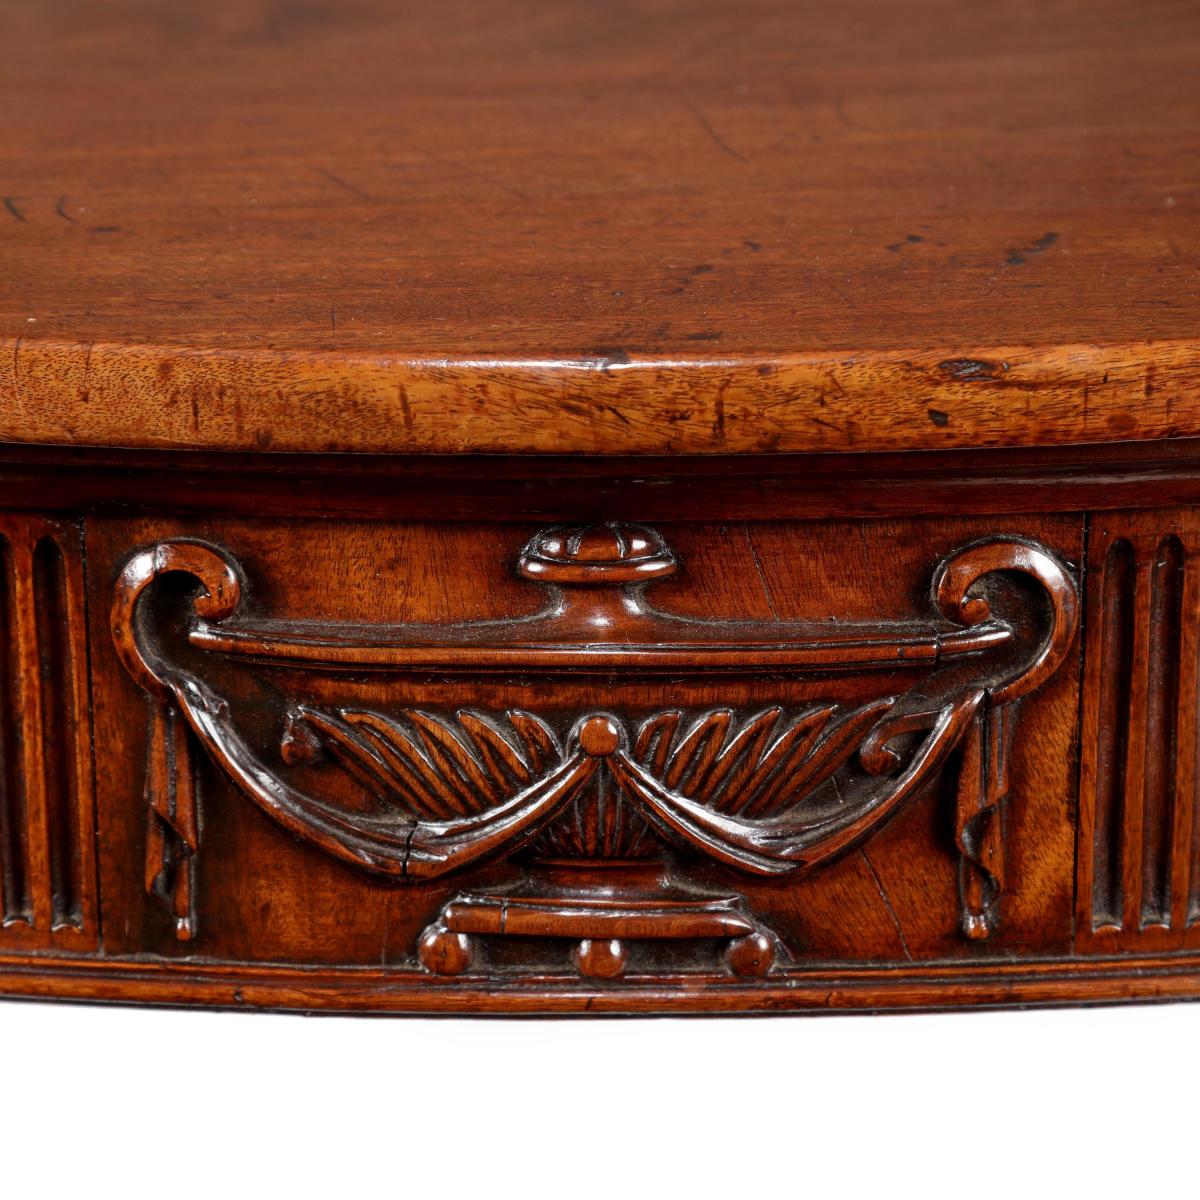 George III serpentine carved mahogany side table in the manner of Robert Adam